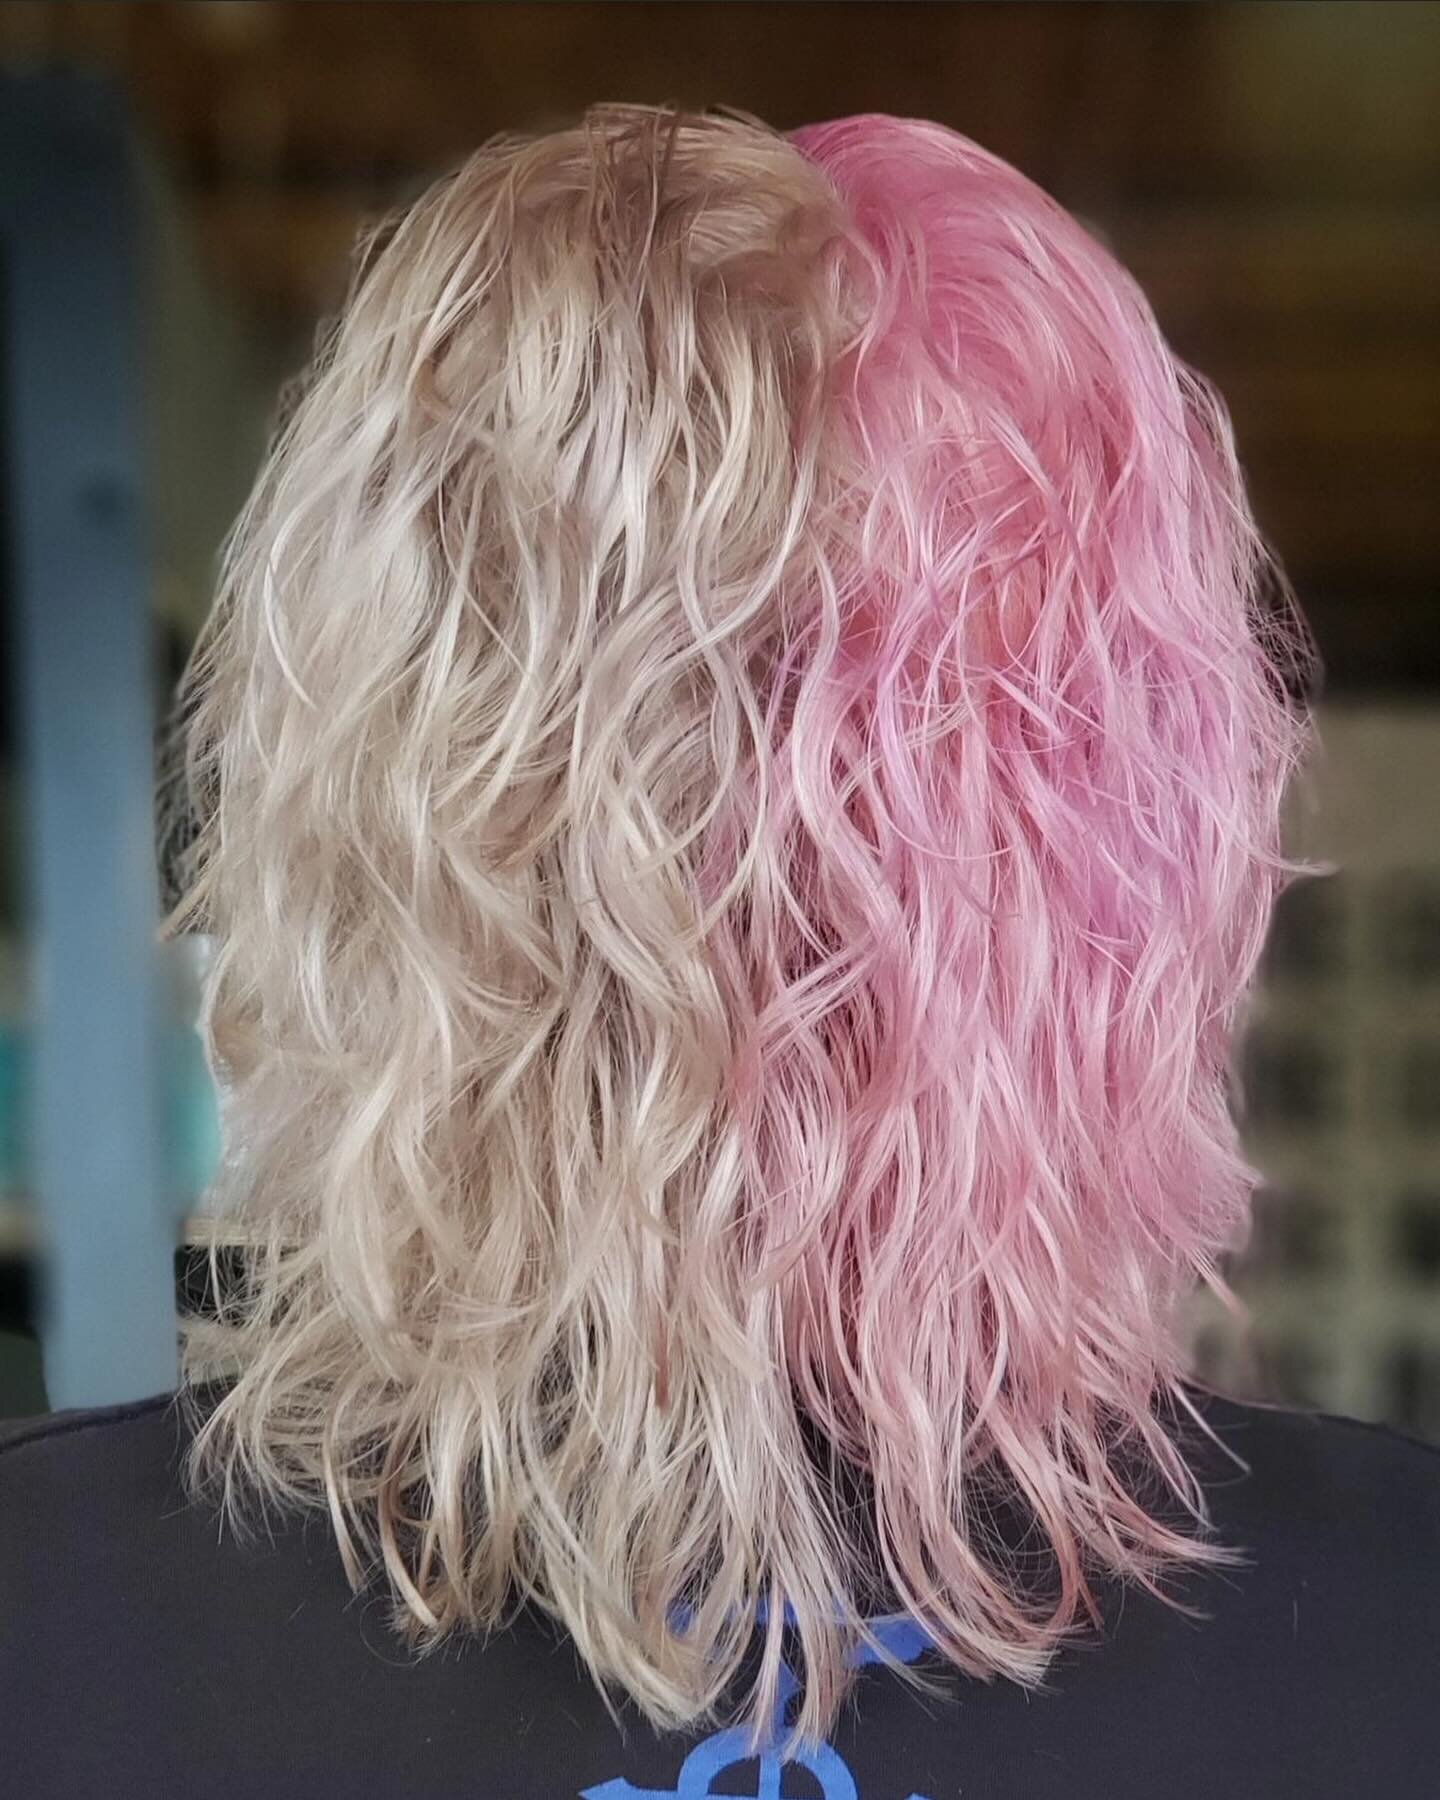 🍬Cotton Candy Skies🍬

Another stunning split fashion color from the one and only @beautytherapybykim 

If you didn&rsquo;t know already - Kim has been recently placing in entries for @oneshothairawards and we&rsquo;re all rooting for her big time. 